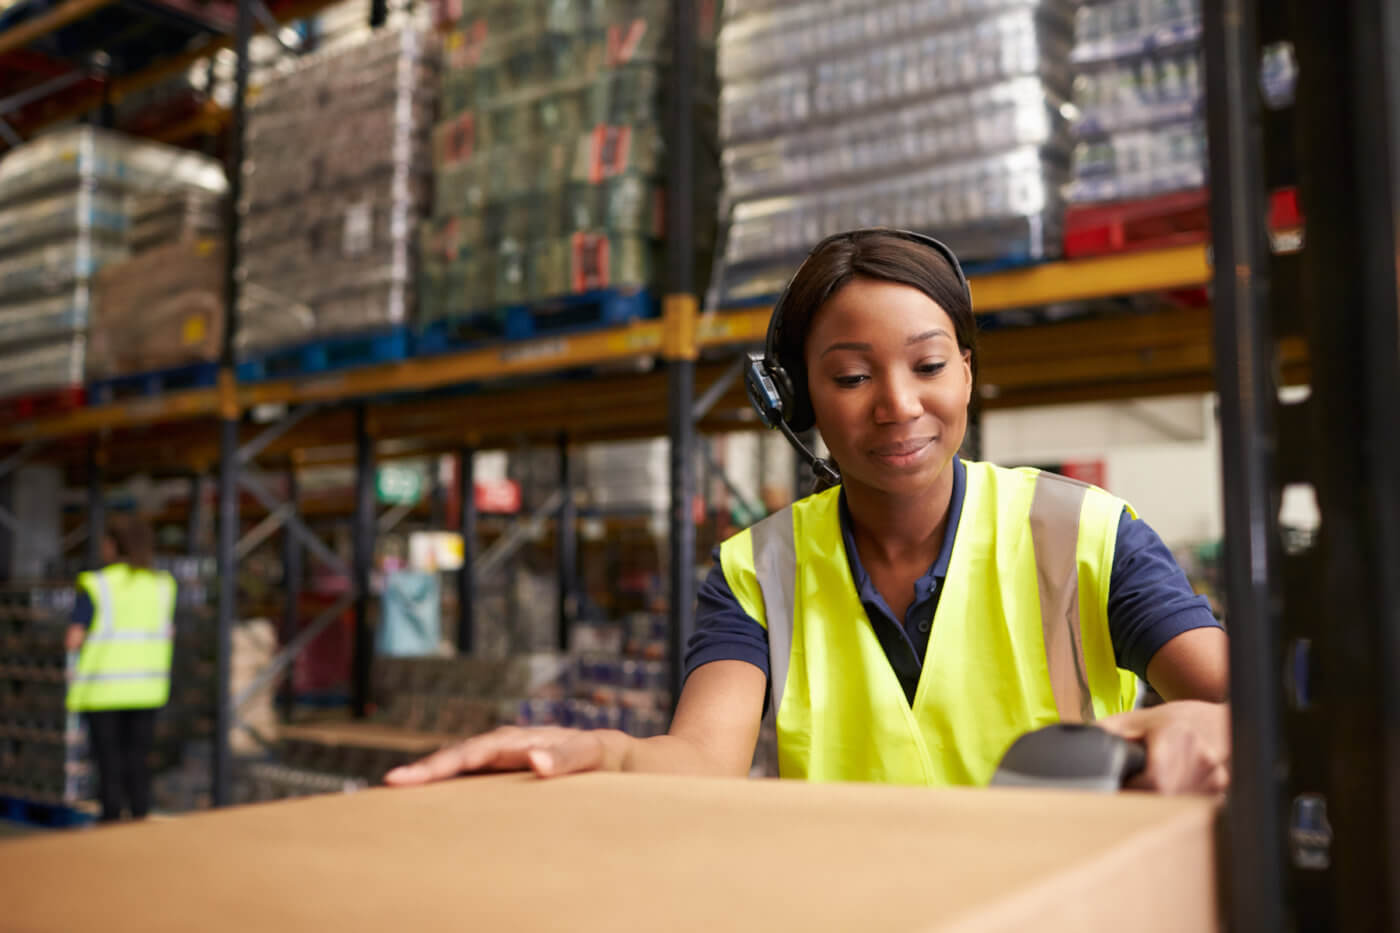 Woman using a barcode reader in a distribution warehouse - insurance verification